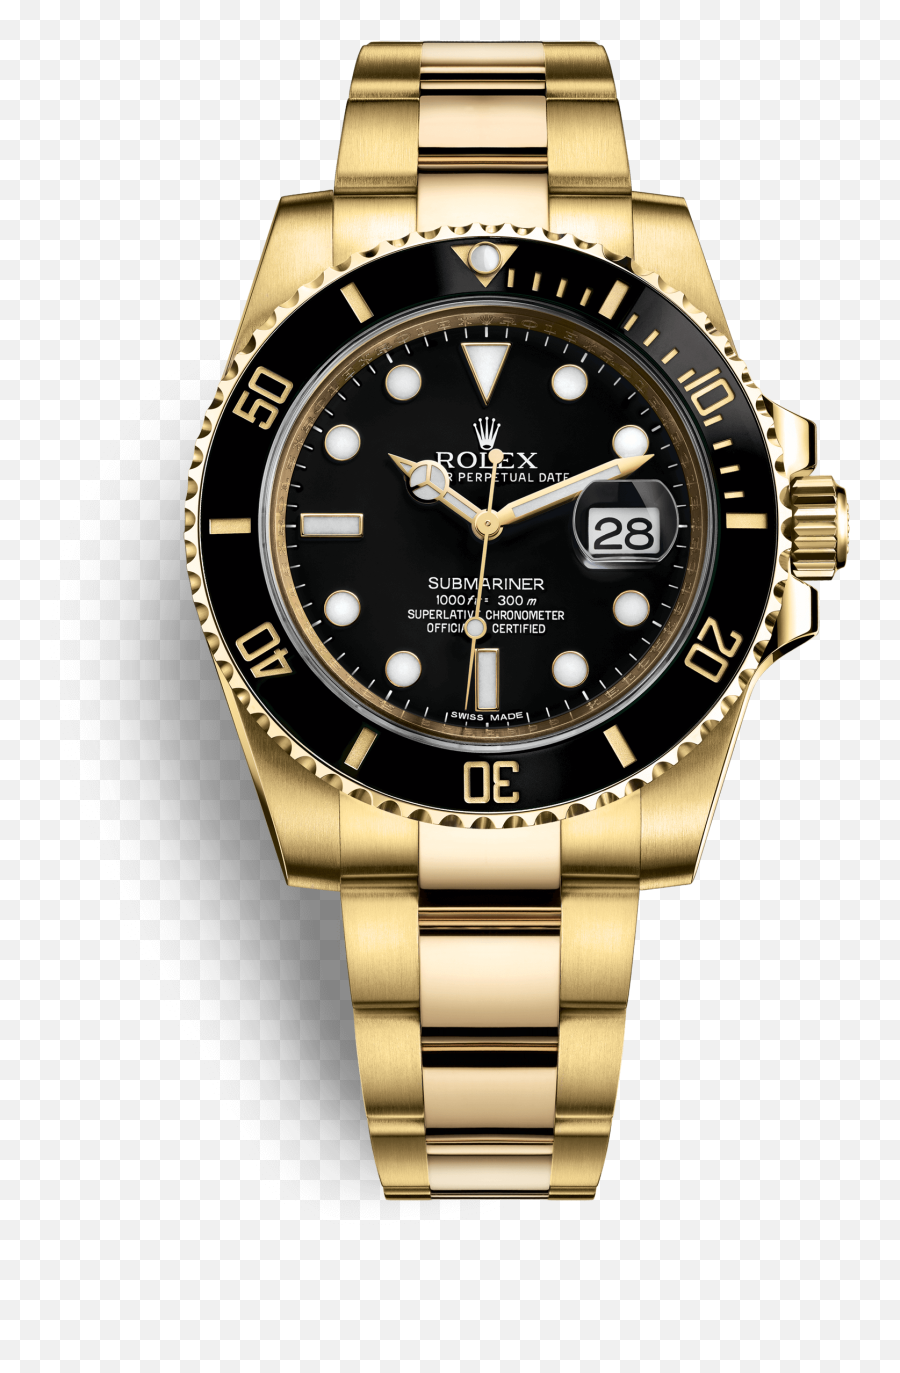 Submariner Watch Rolex Gold Colored - Rolex Submariner Gold Black Png,Rolex Logo Png